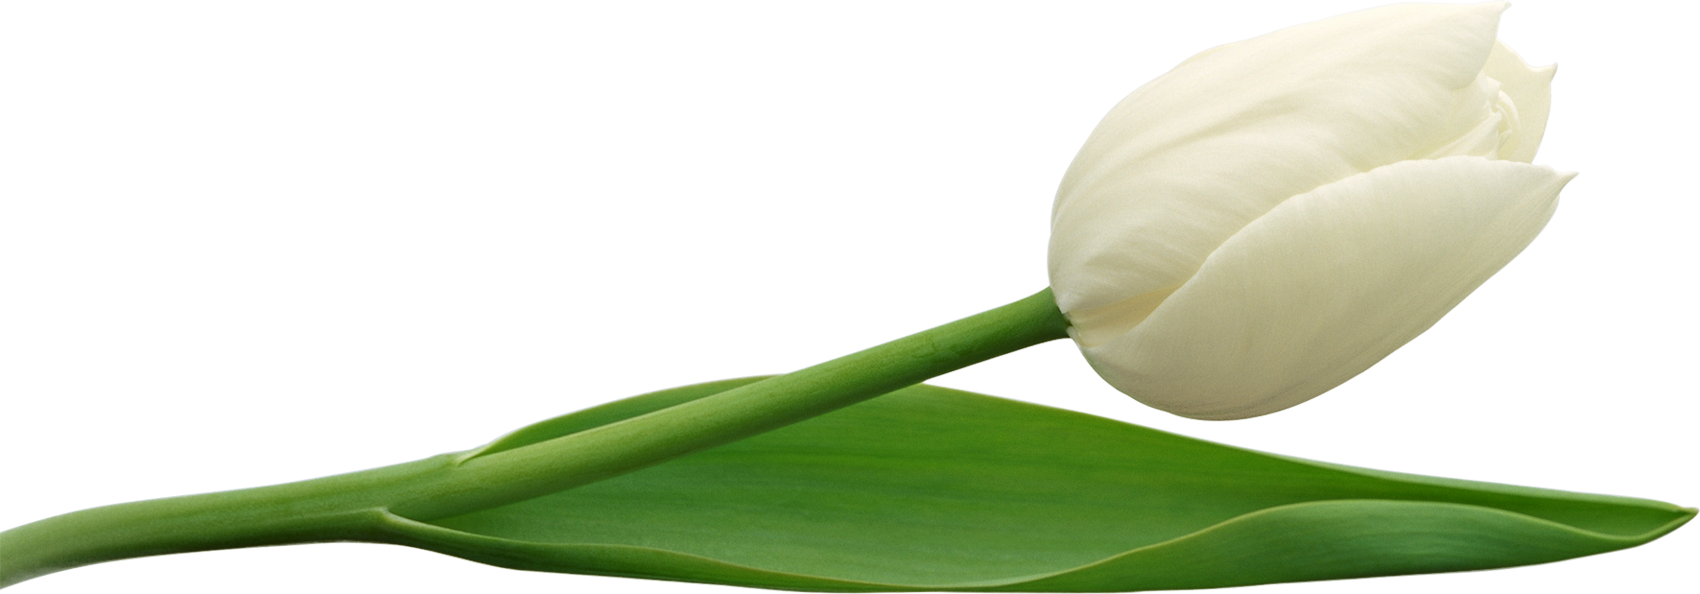 Large size tulip png picture 